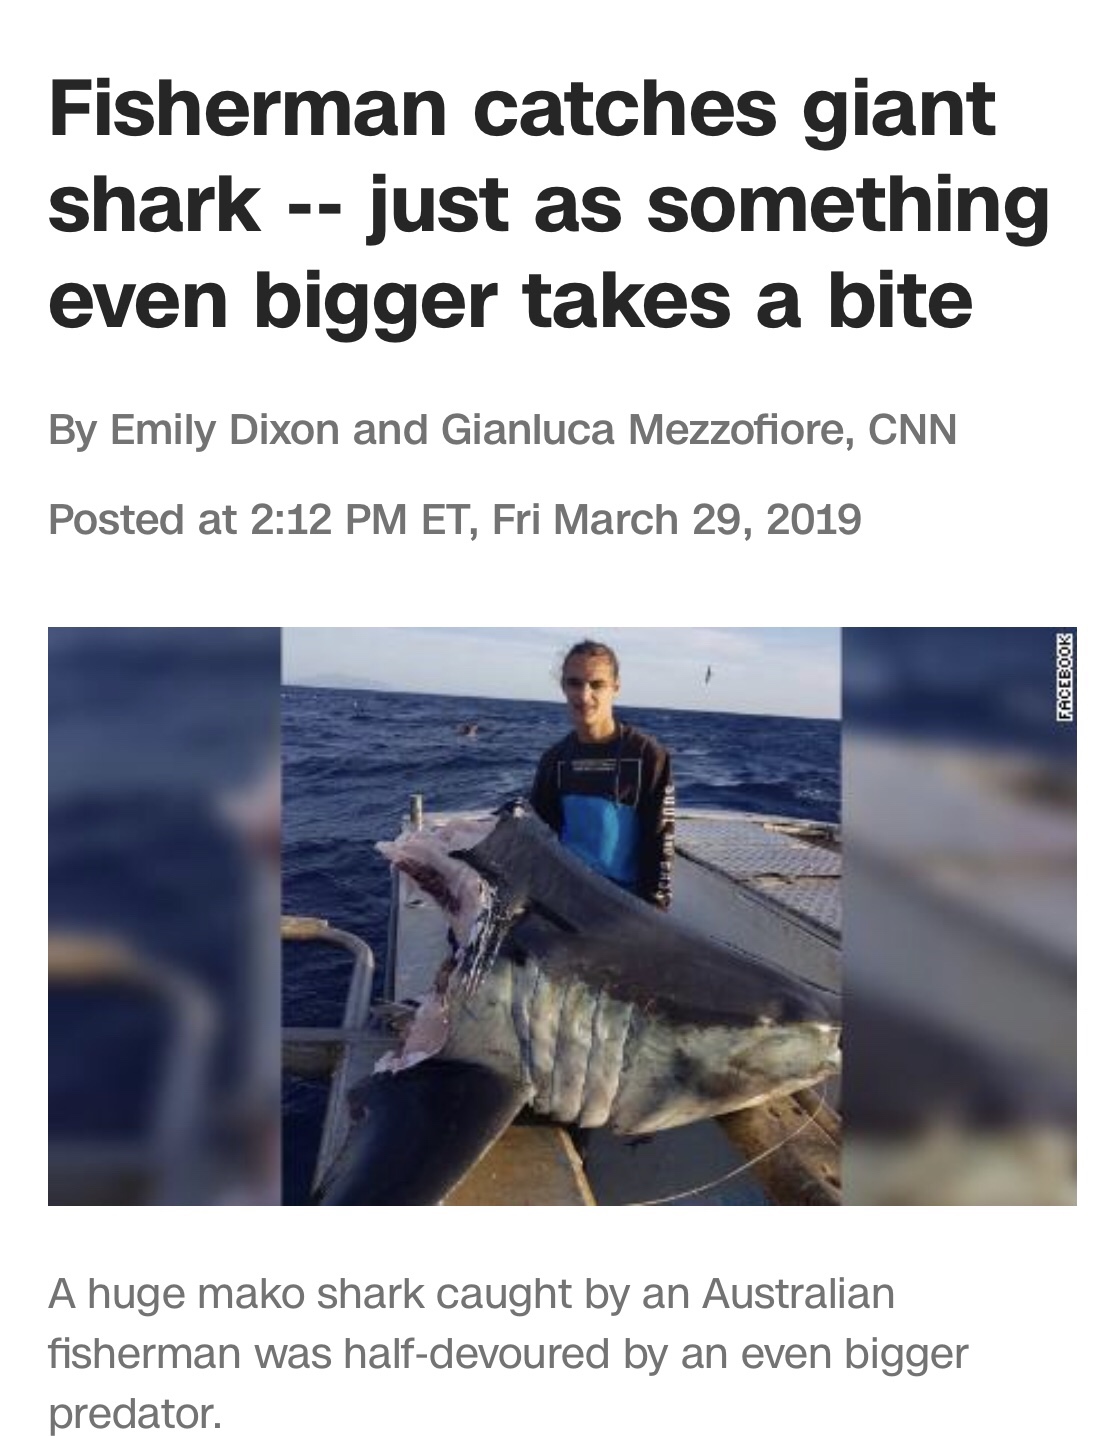 mako shark memes - Fisherman catches giant shark just as something even bigger takes a bite By Emily Dixon and Gianluca Mezzofiore, Cnn Posted at Et, Fri Facebook A huge mako shark caught by an Australian fisherman was halfdevoured by an even bigger preda